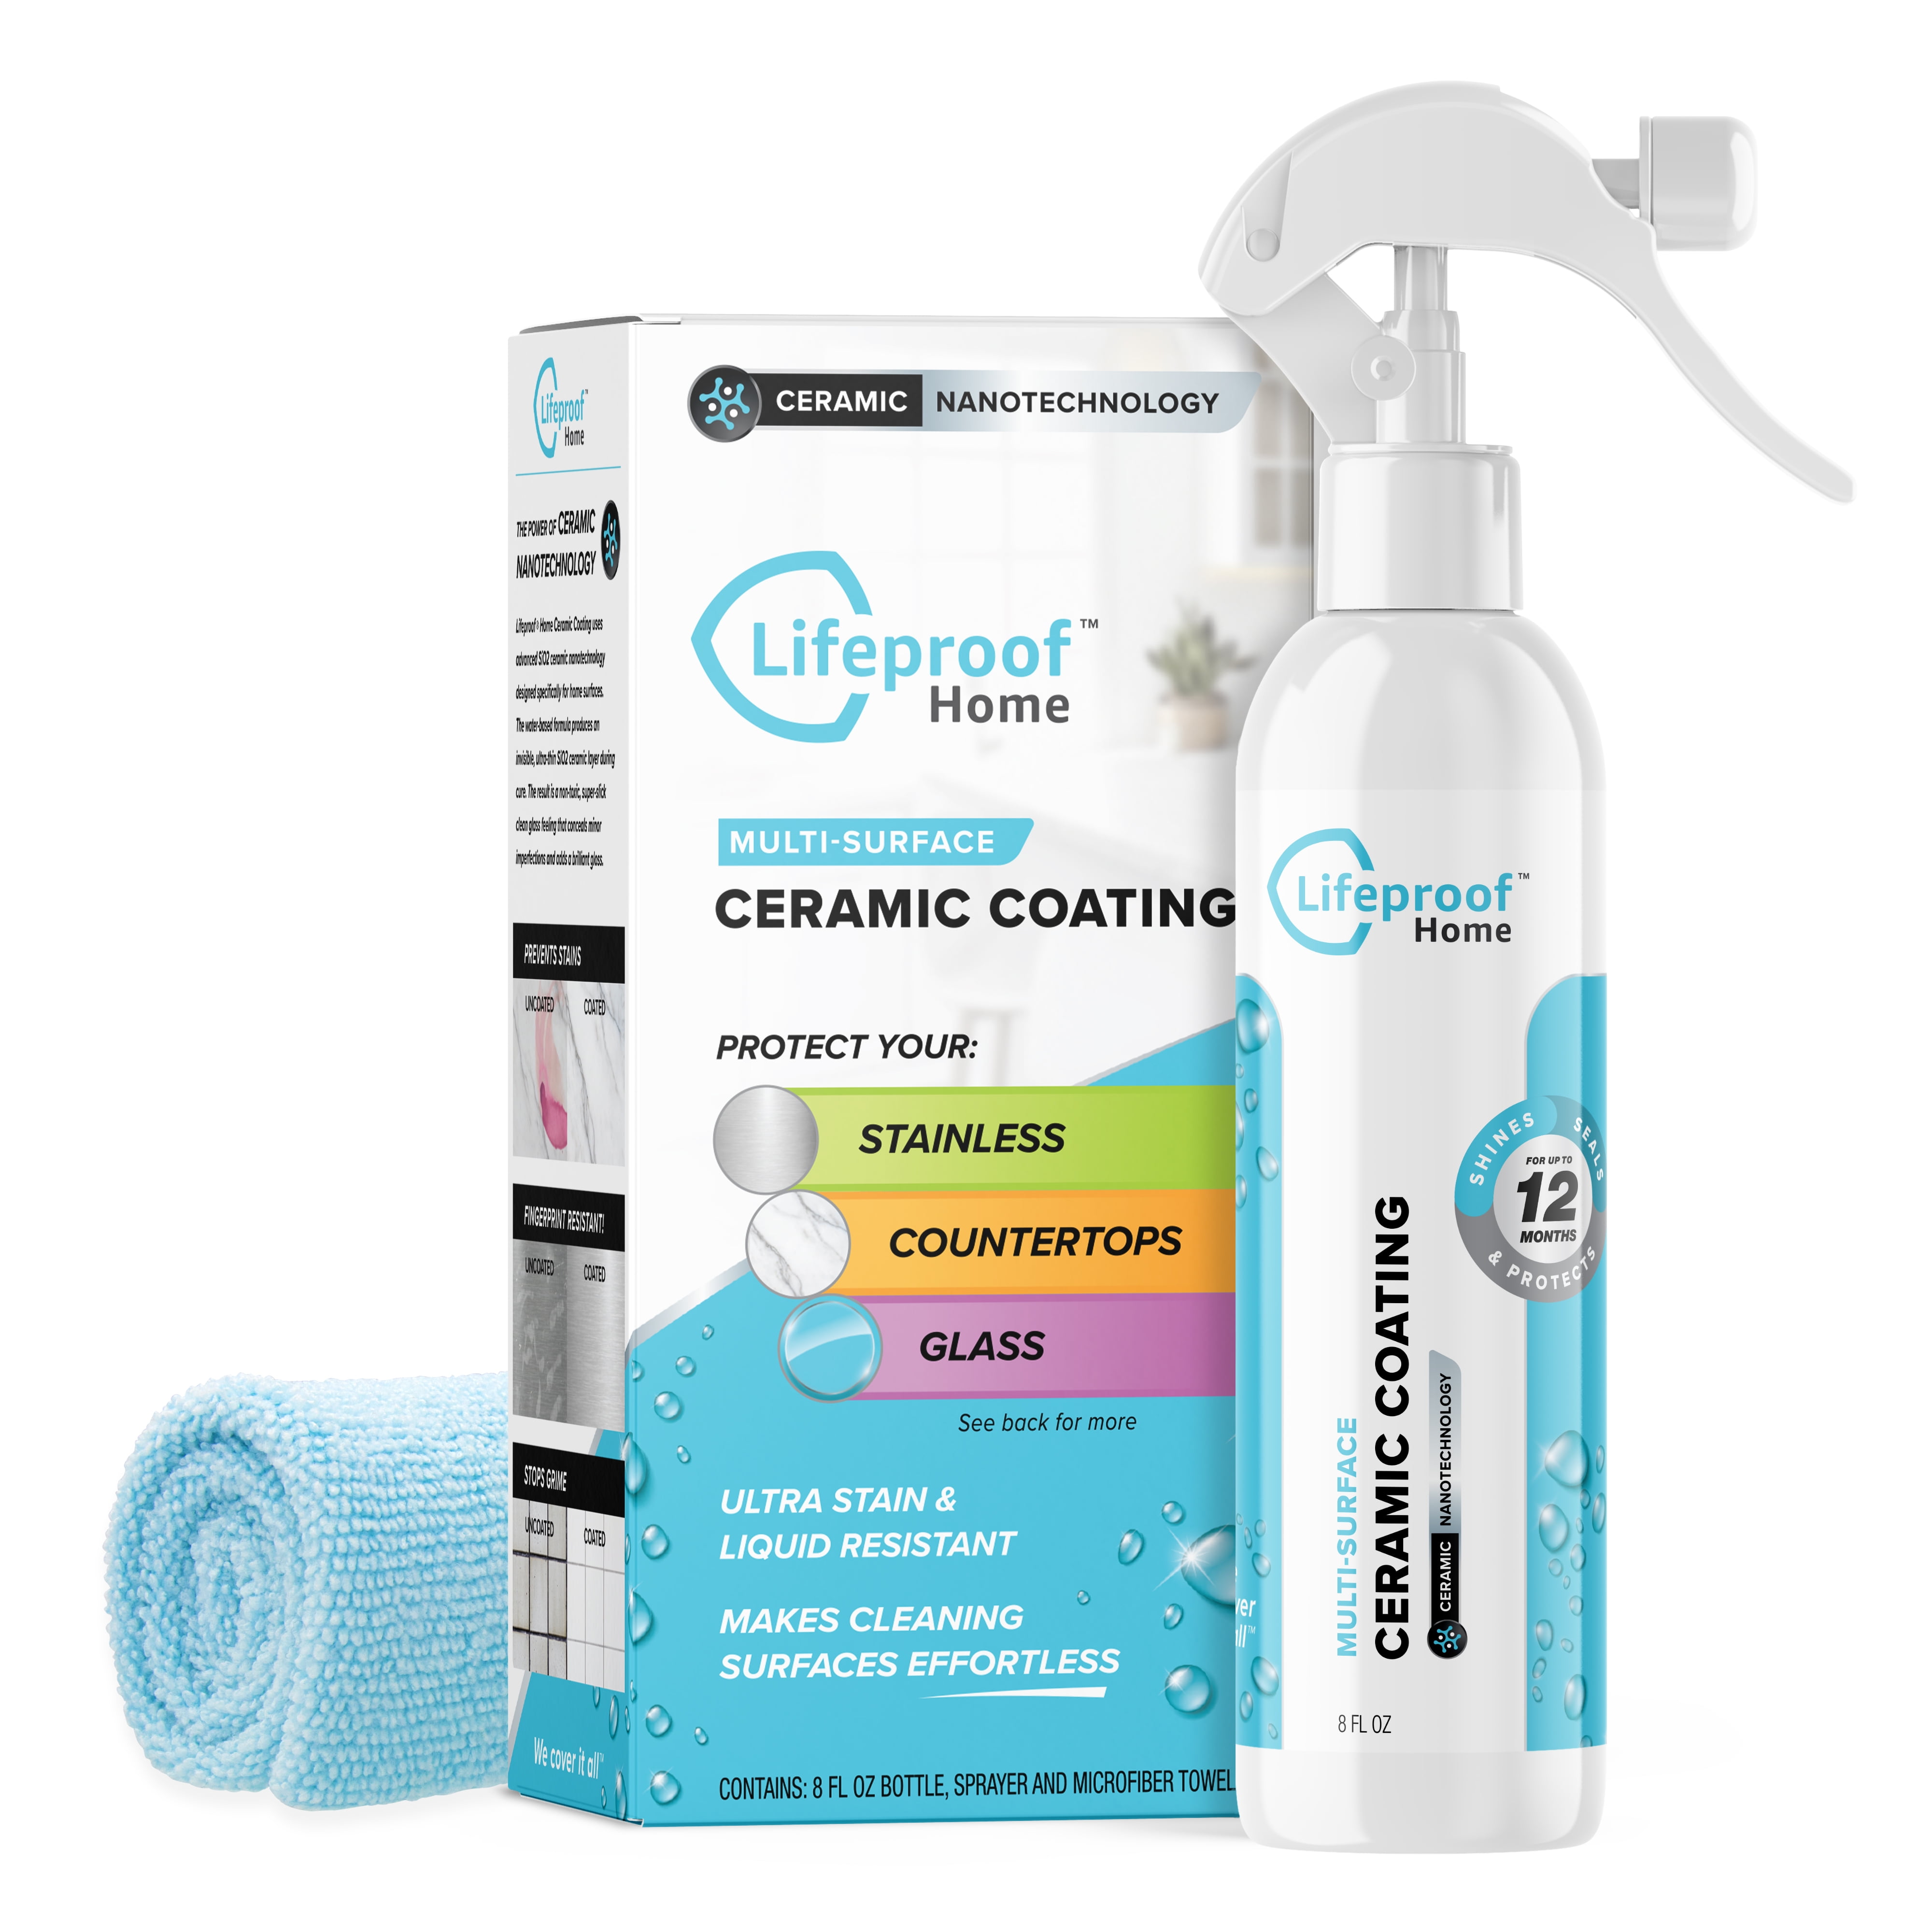 Home Ceramic Coating - Shine & Protect all Home Surfaces!